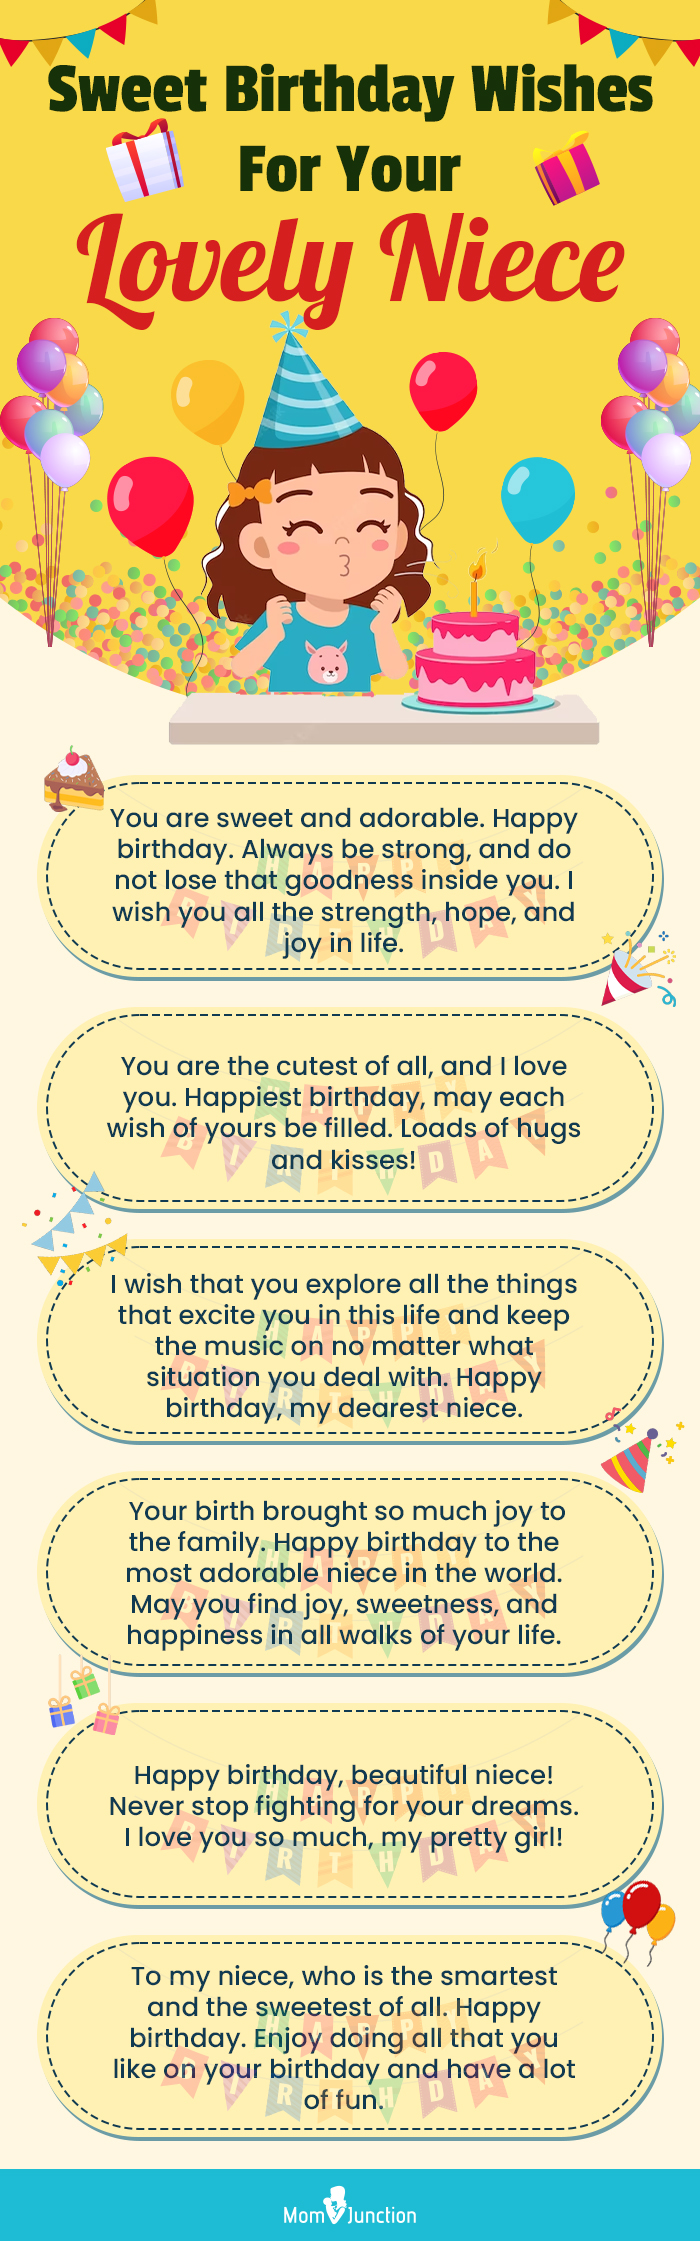 Happy Birthday to the Love of My Life Greeting Card - Dreams After All